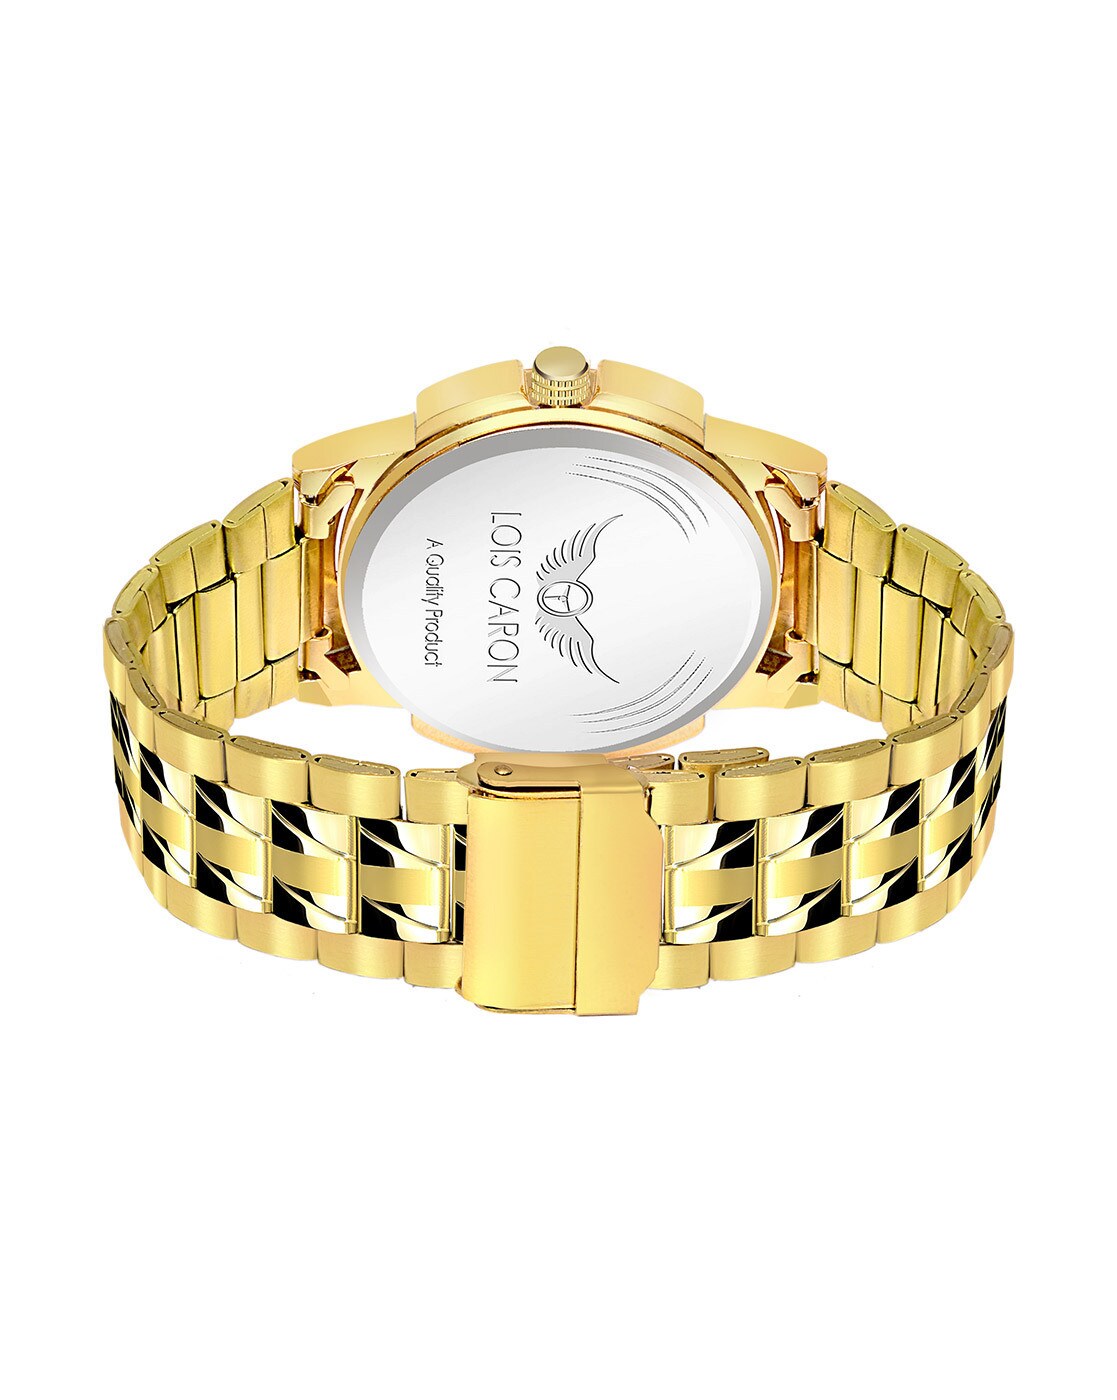 Swiss-co gold plated man's watch Analog Watches